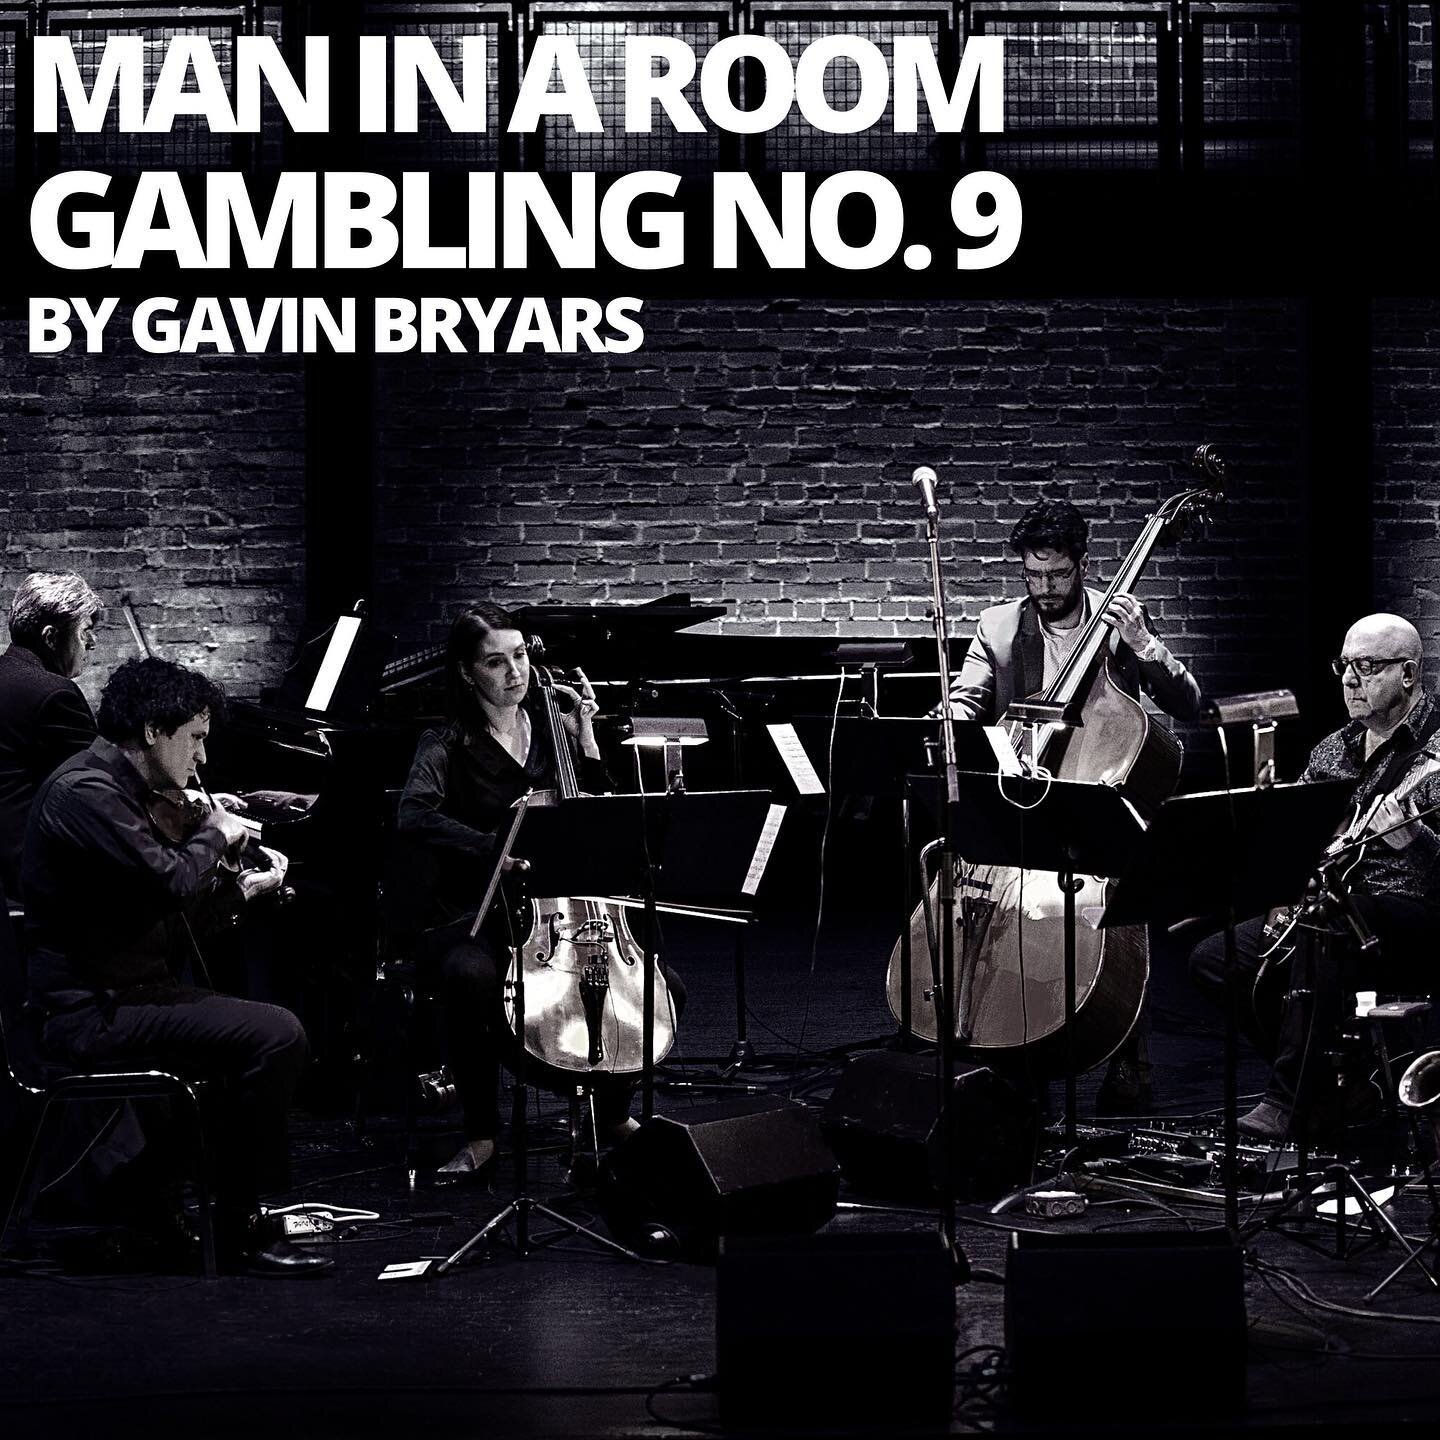 &lsquo;Man in a Room Gambling No. 9&rsquo; was recorded live in concert as part of AoTE&rsquo;s Gavin Bryars tribute in 2002, the first of countless collaborations with Gavin.

Mark Fewer and Jayne Maddison on violins, Douglas Perry on viola and Roma